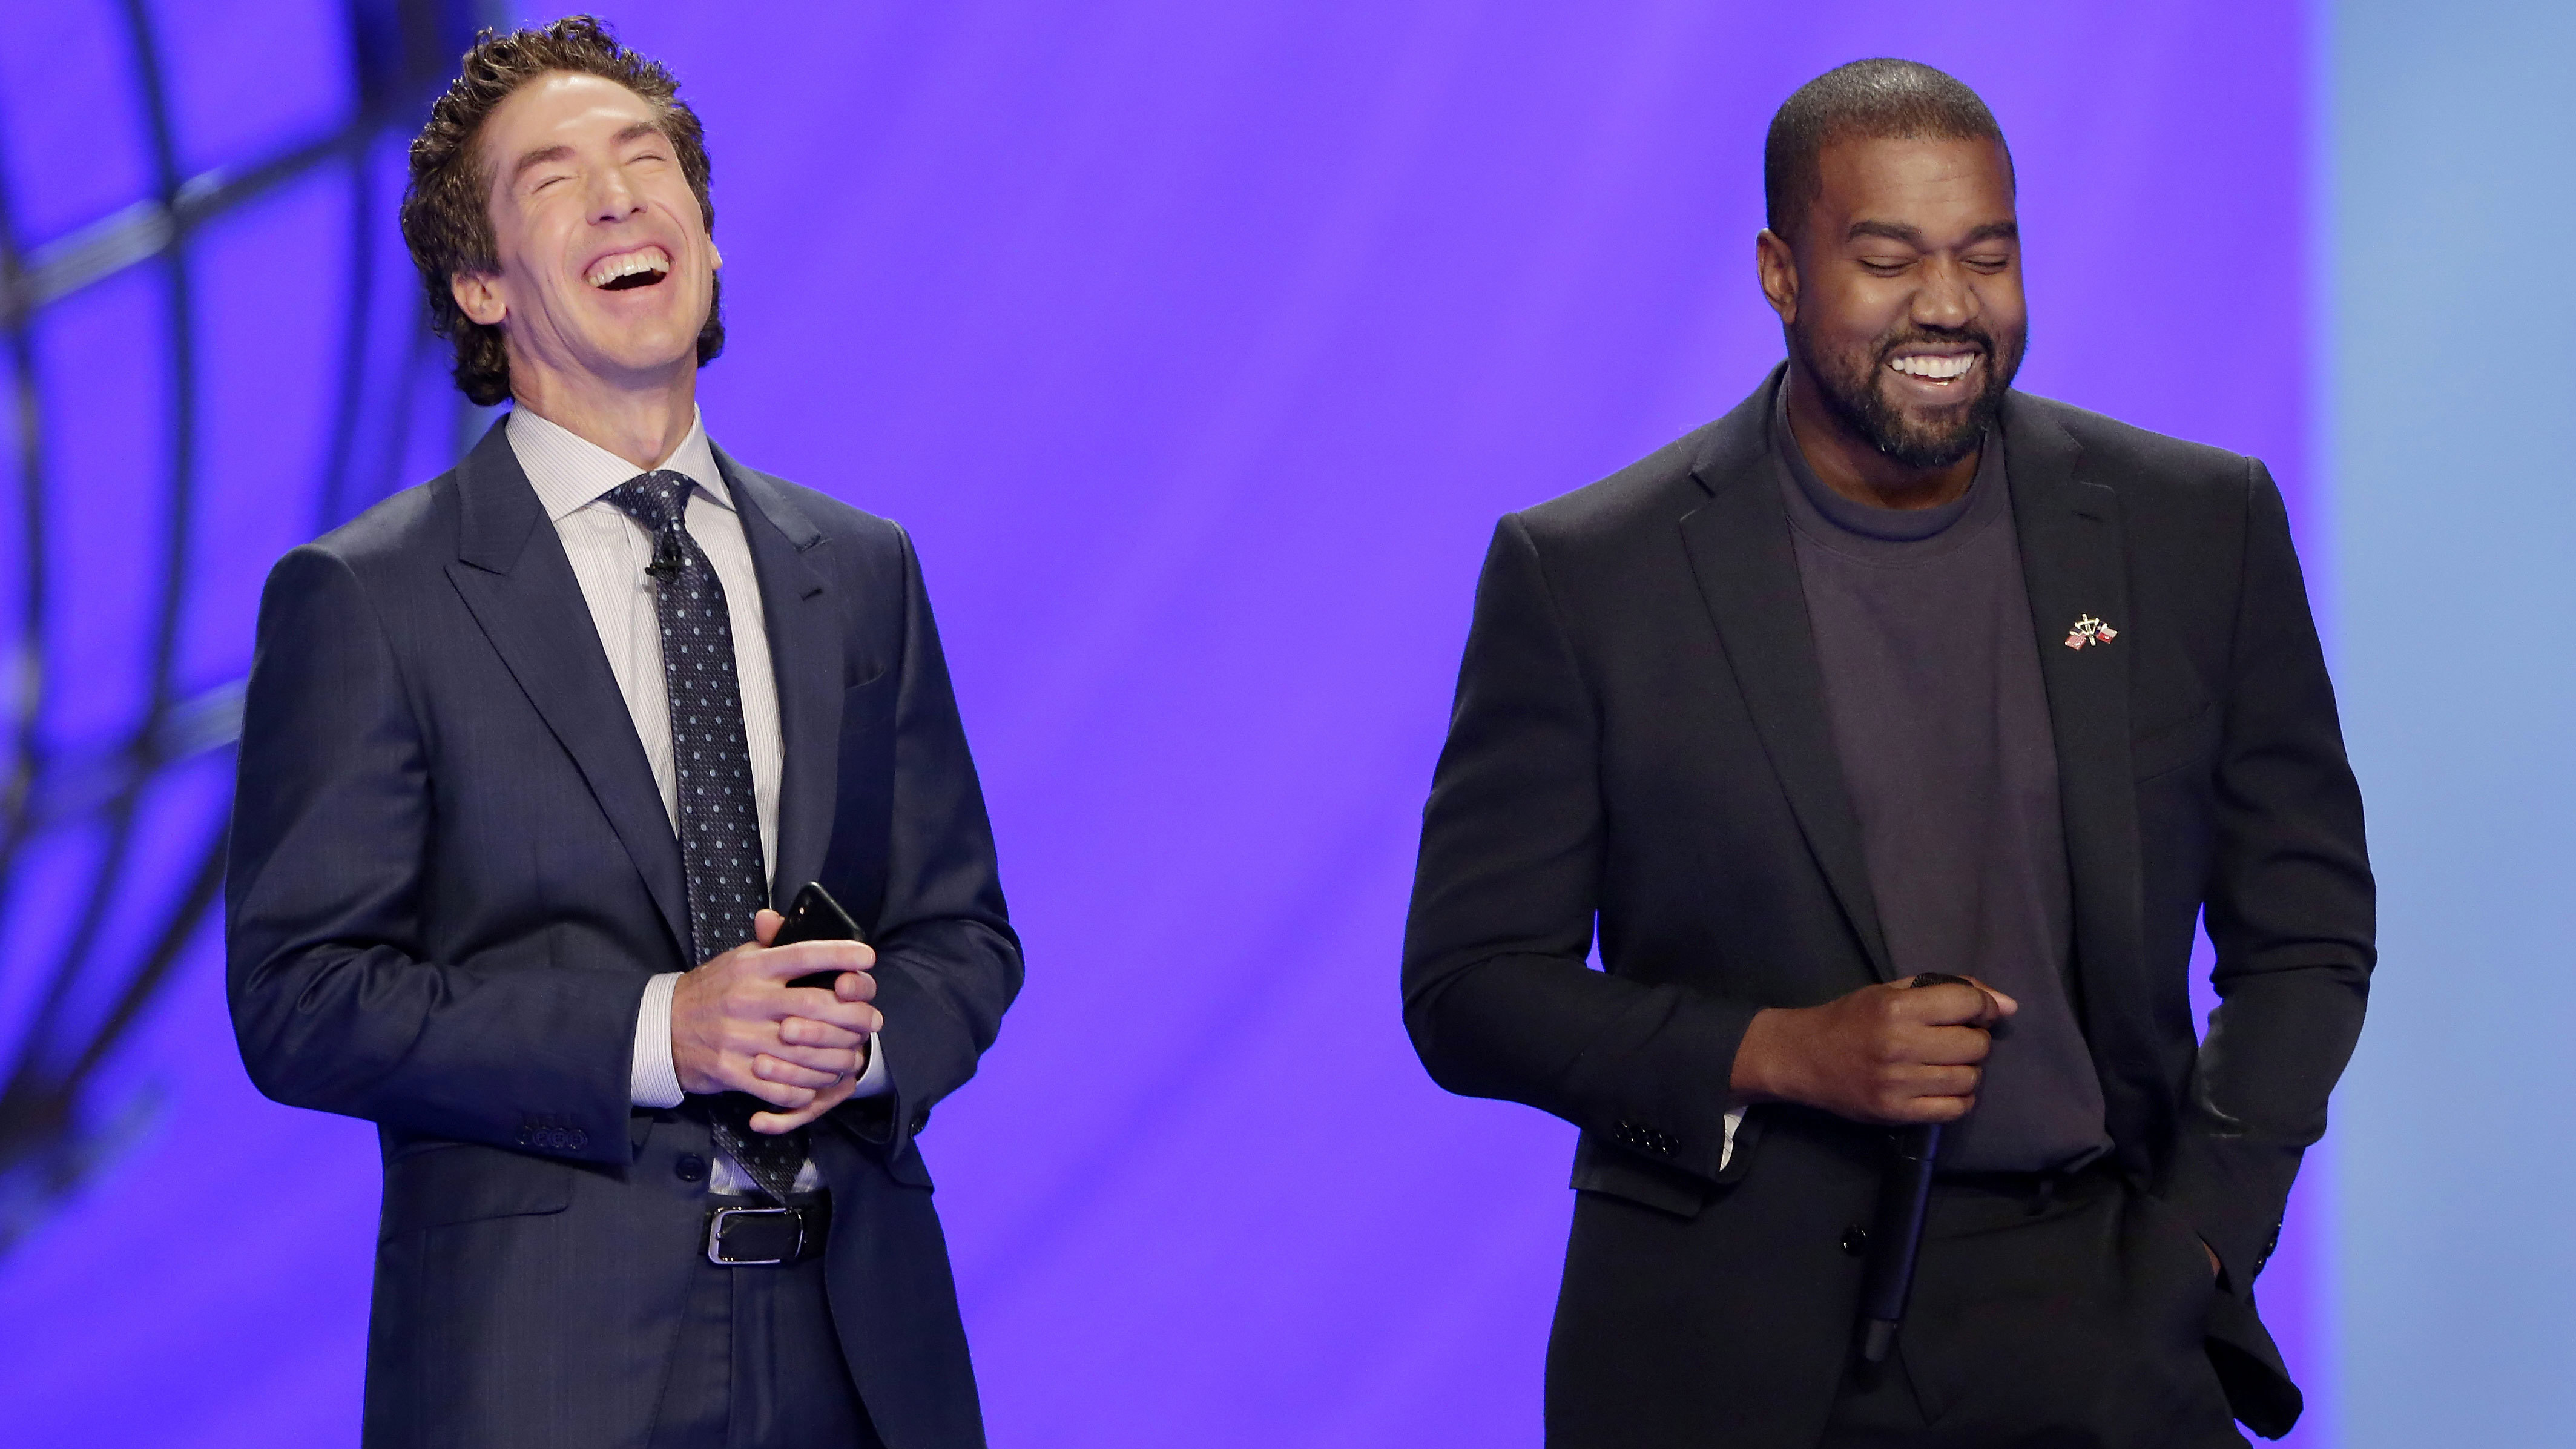 High profile pastor Joel Osteen has millions of followers worldwide. He is pictured here with Kanye West in 2019.